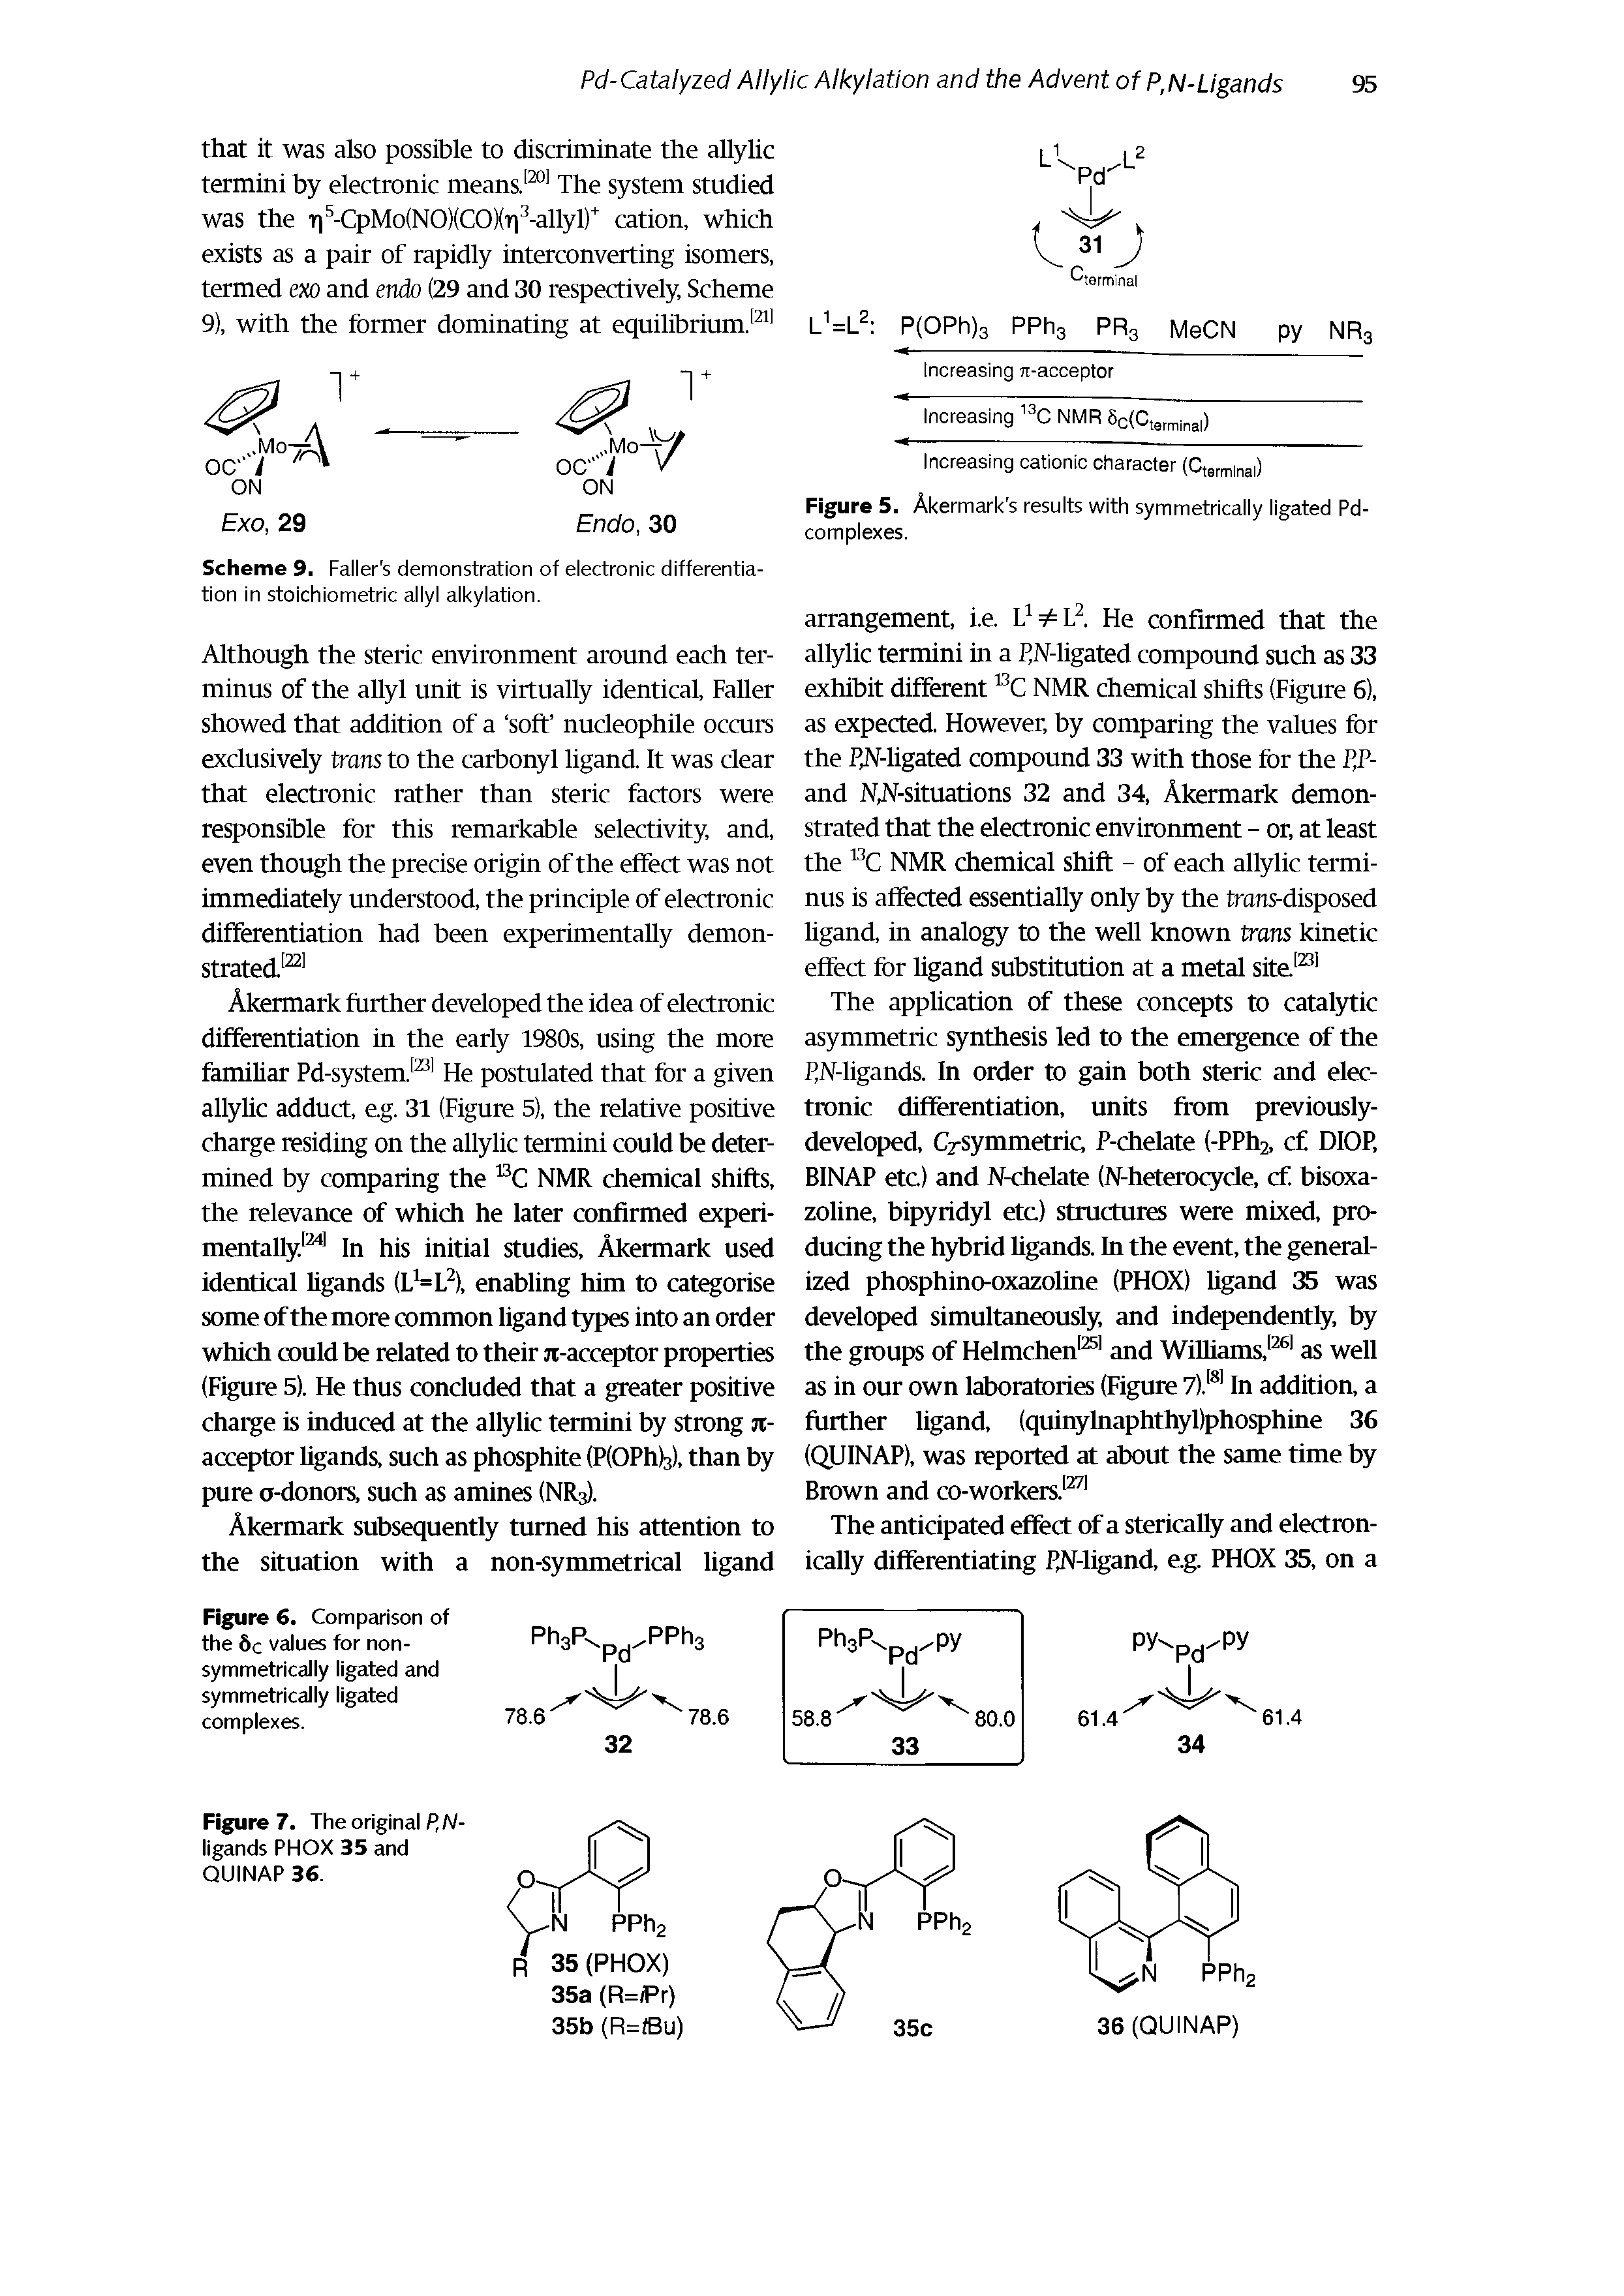 Scheme 9. Faller s demonstration of electronic differentiation in stoichiometric allyl alkylation.